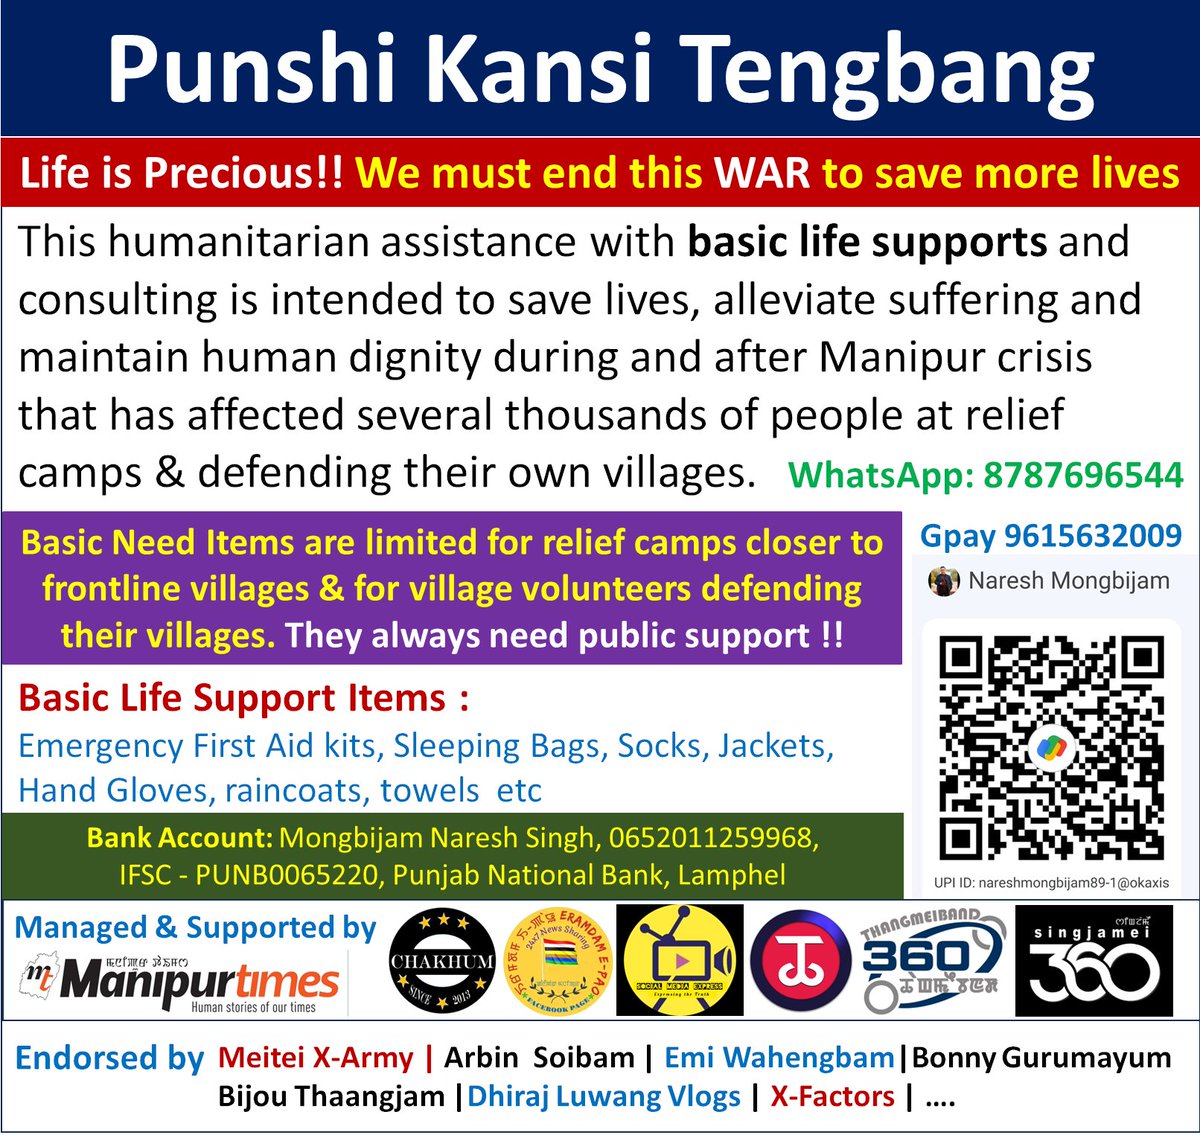 Punshi Kansi Tengbang Life is Precious!! We must end this WAR to save more lives. This humanitarian assistance with basic life supports and consulting is intended to save lives, alleviate suffering and maintain human dignity during and after Manipur crisis that has affected